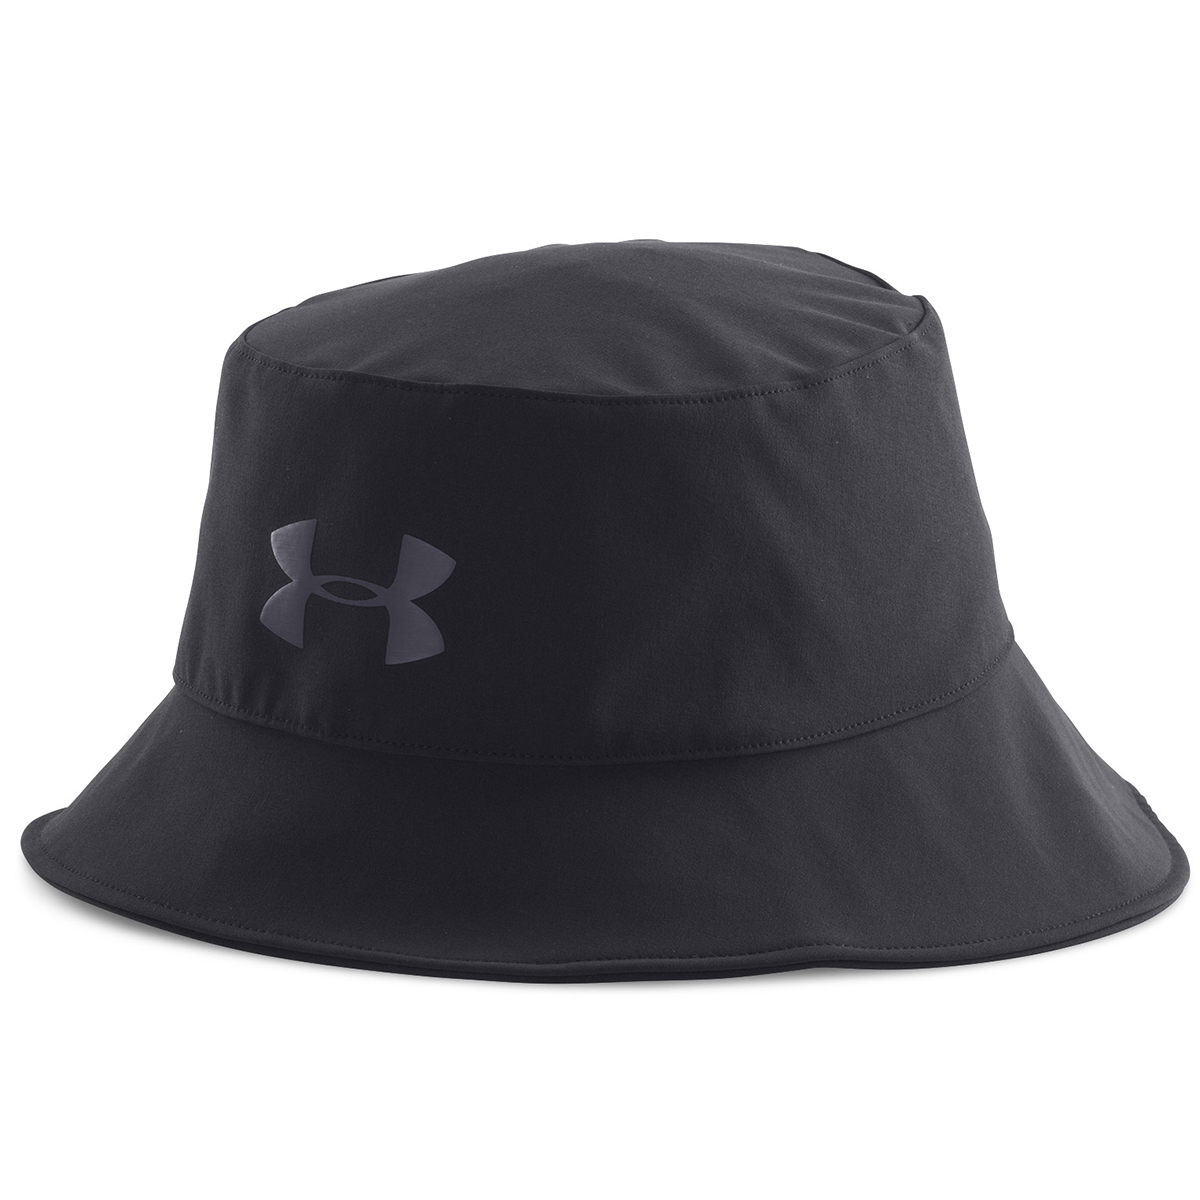 GORE-TEX Bucket Hat from american golf